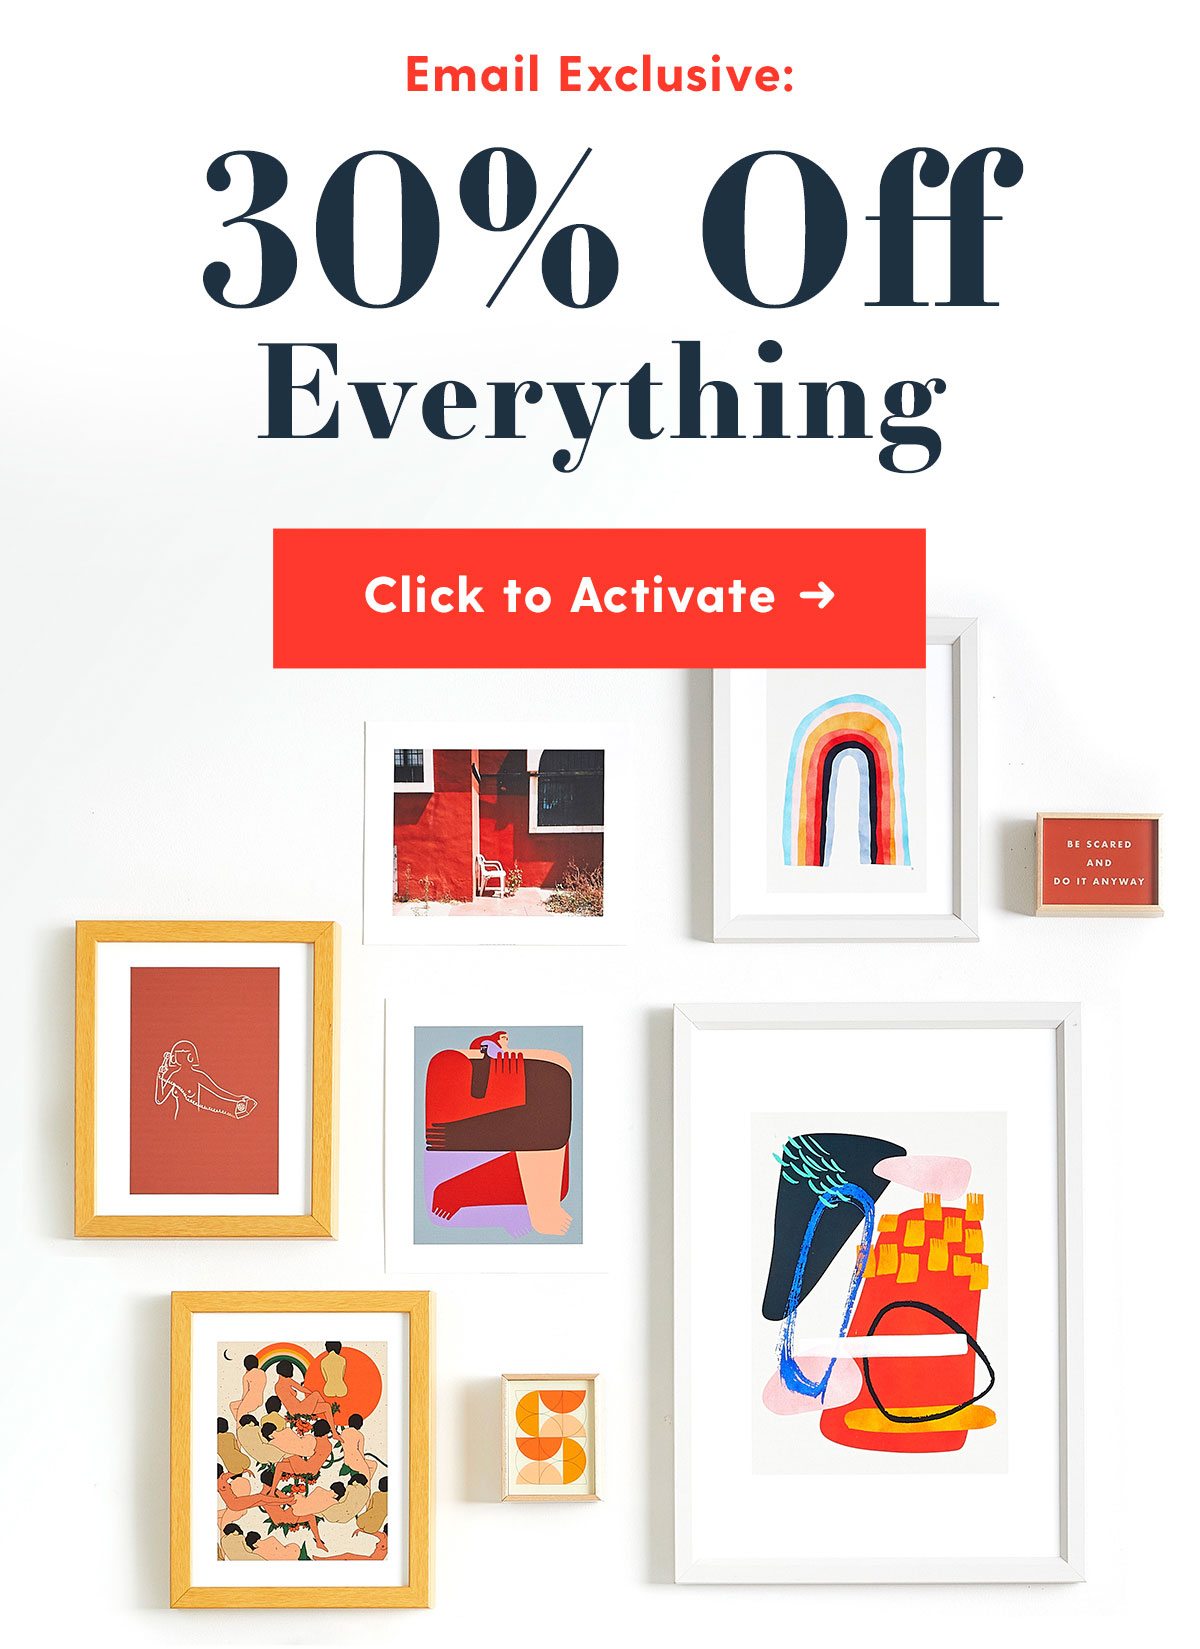 Email Exclusive: 30% Off Everything. Click to Activate →